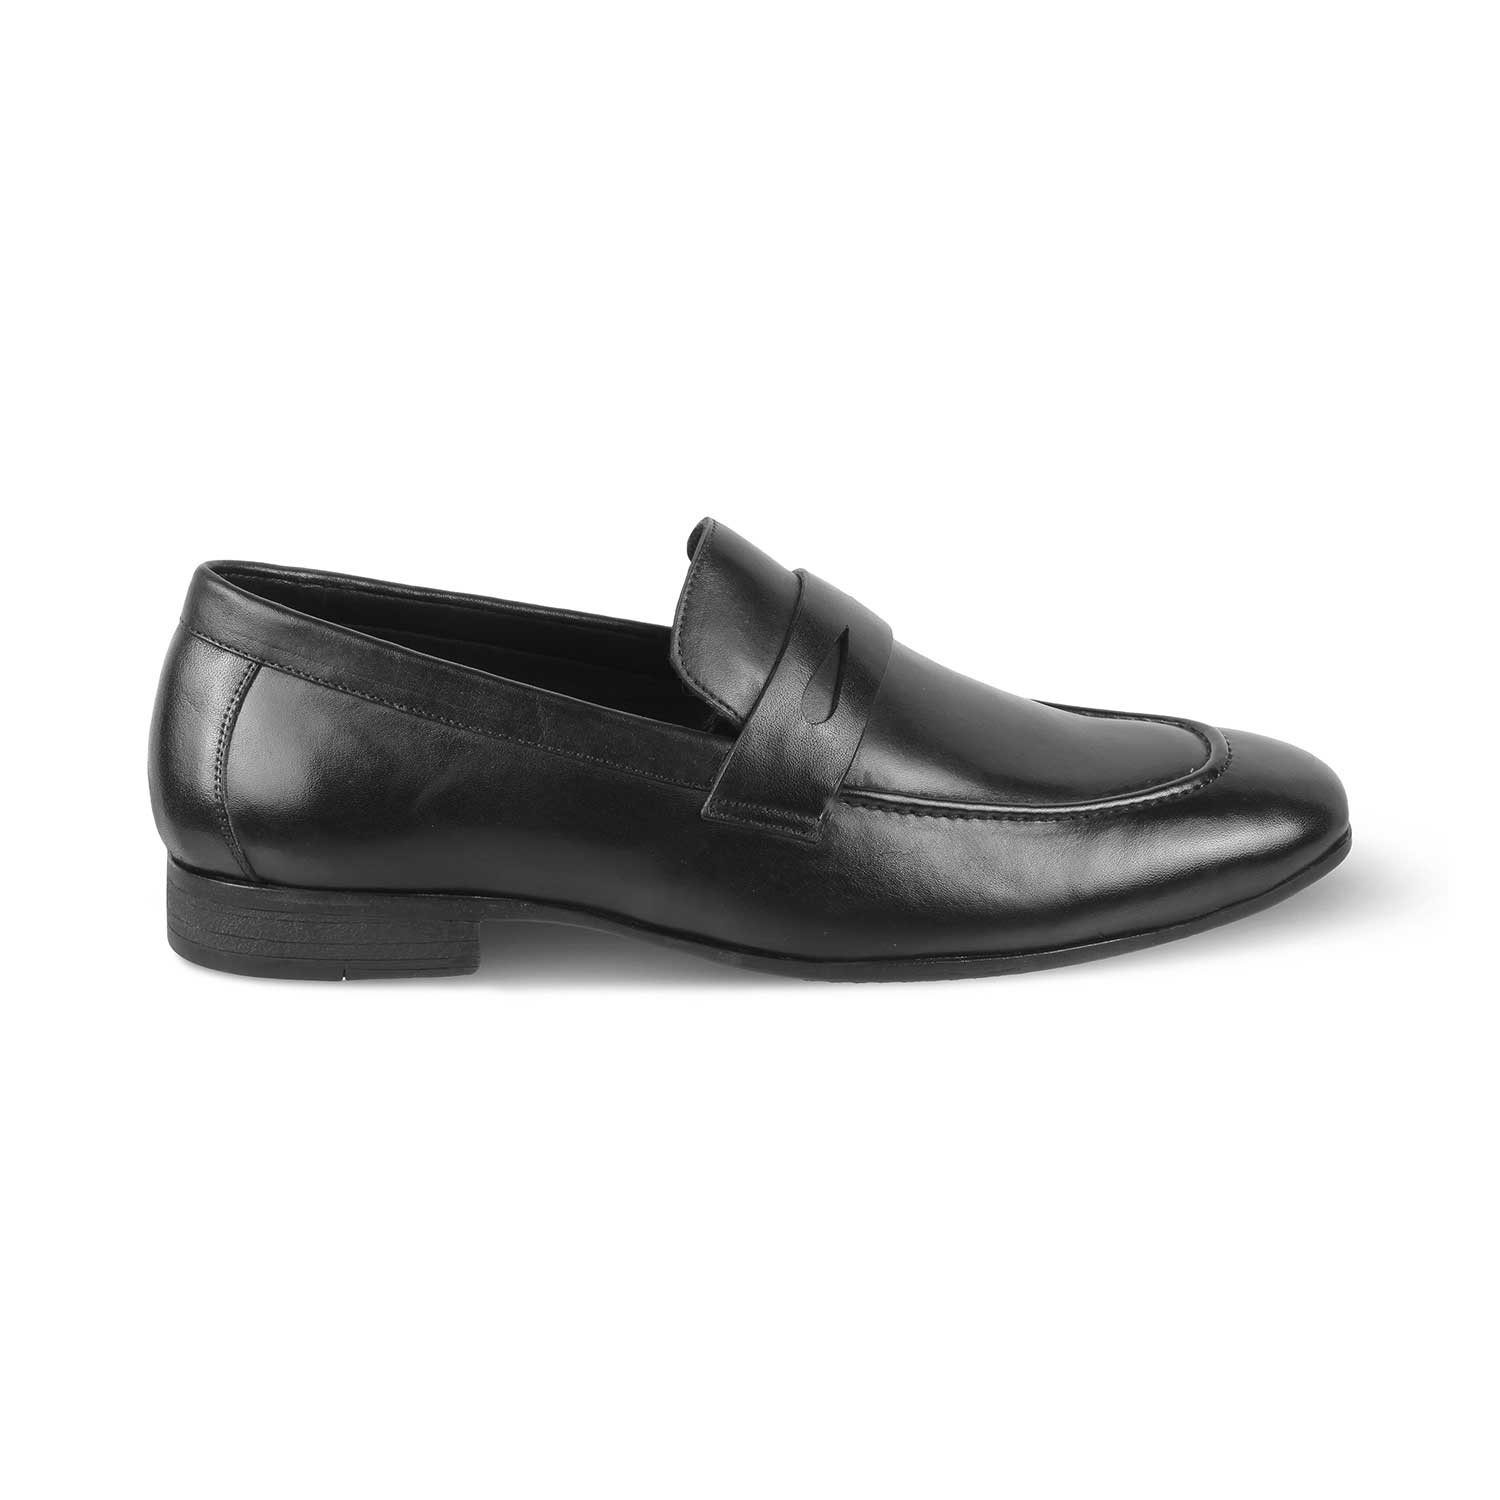 Apenny Black Men's Leather Penny Loafers Online at Tresmode.com